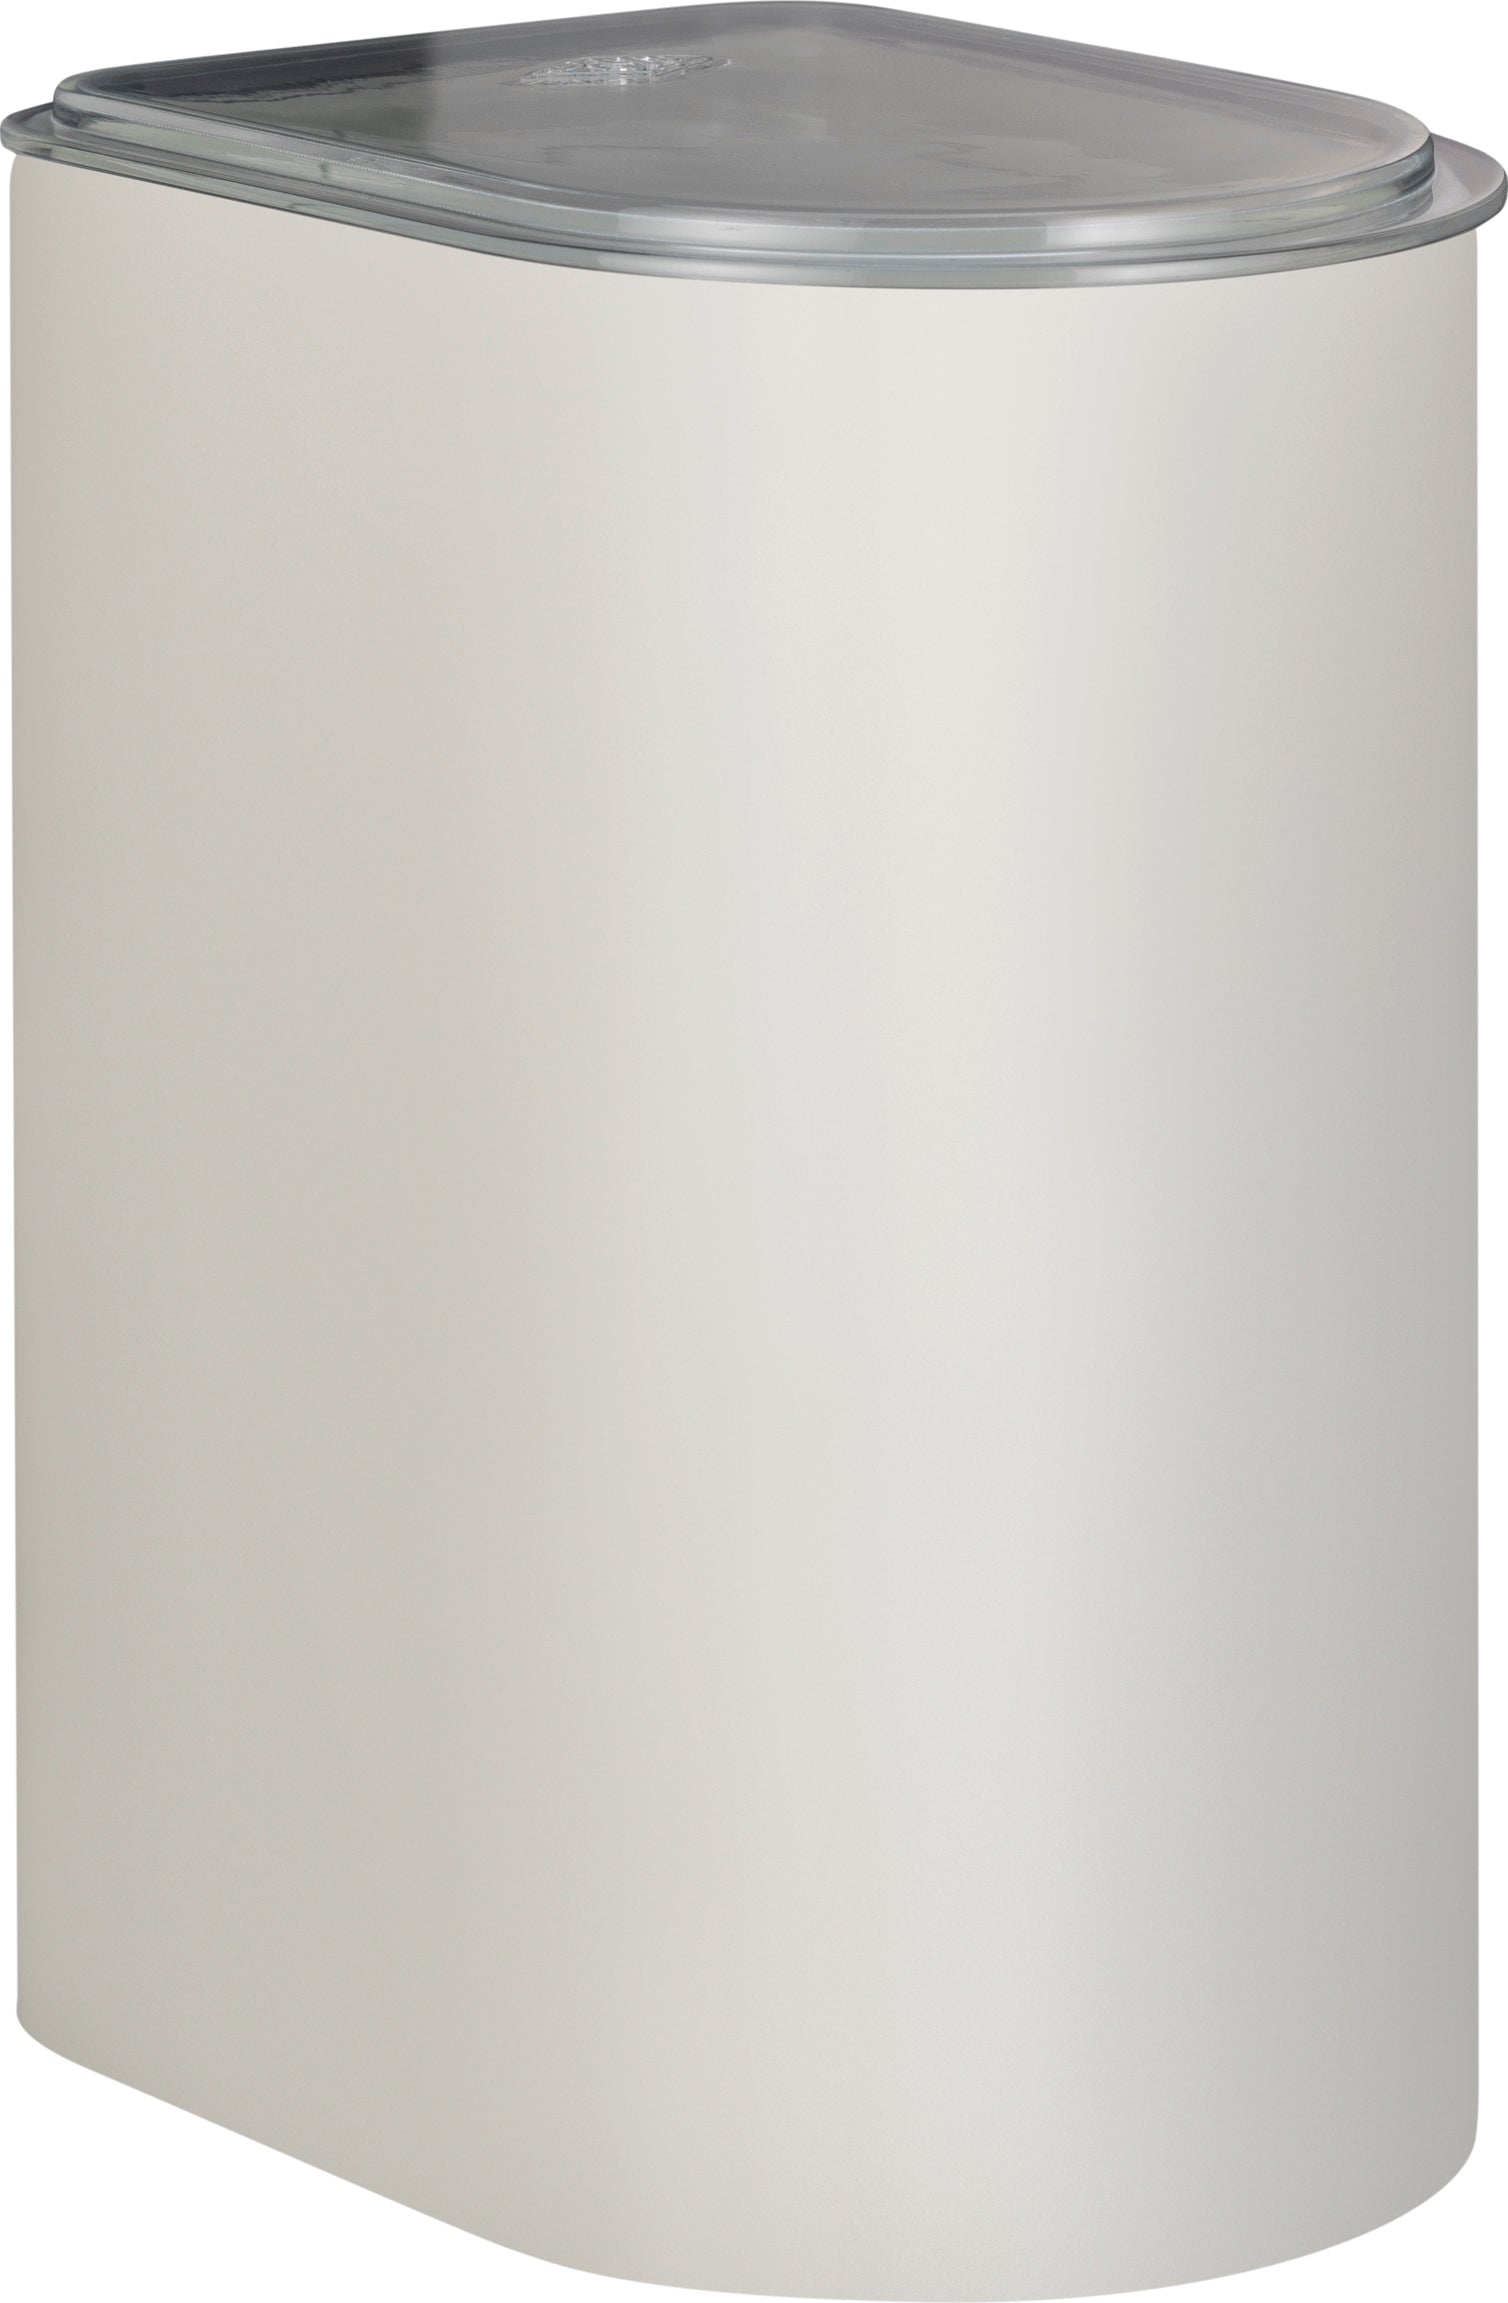 Wesco Canister 3 Litre With Acrylic Lid, Sand Matt